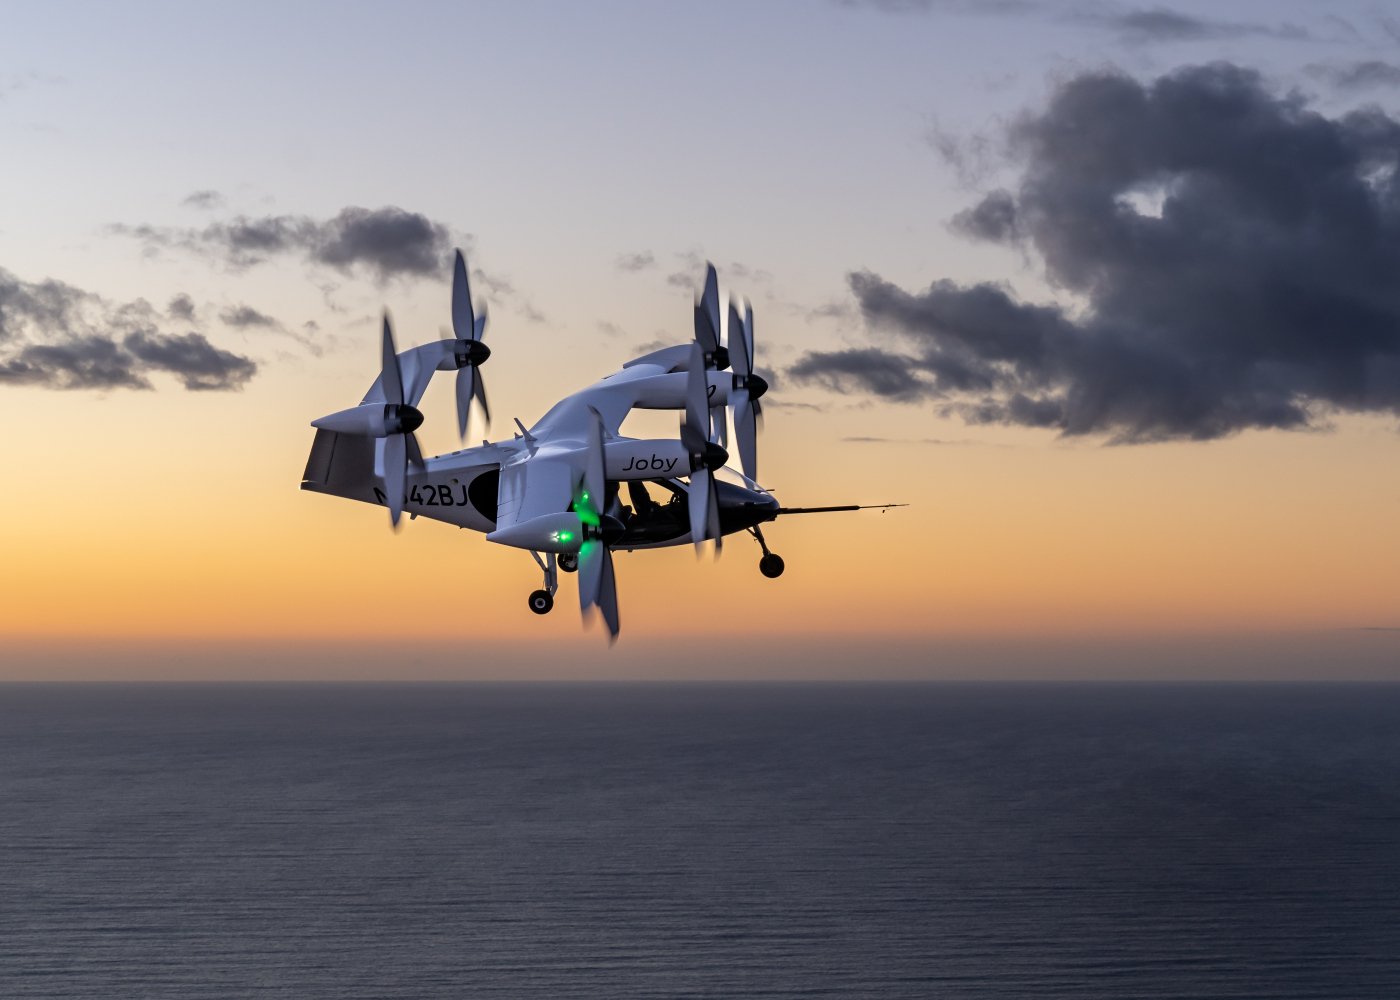 Joby completes second FAA system review for its eVTOL aircraft